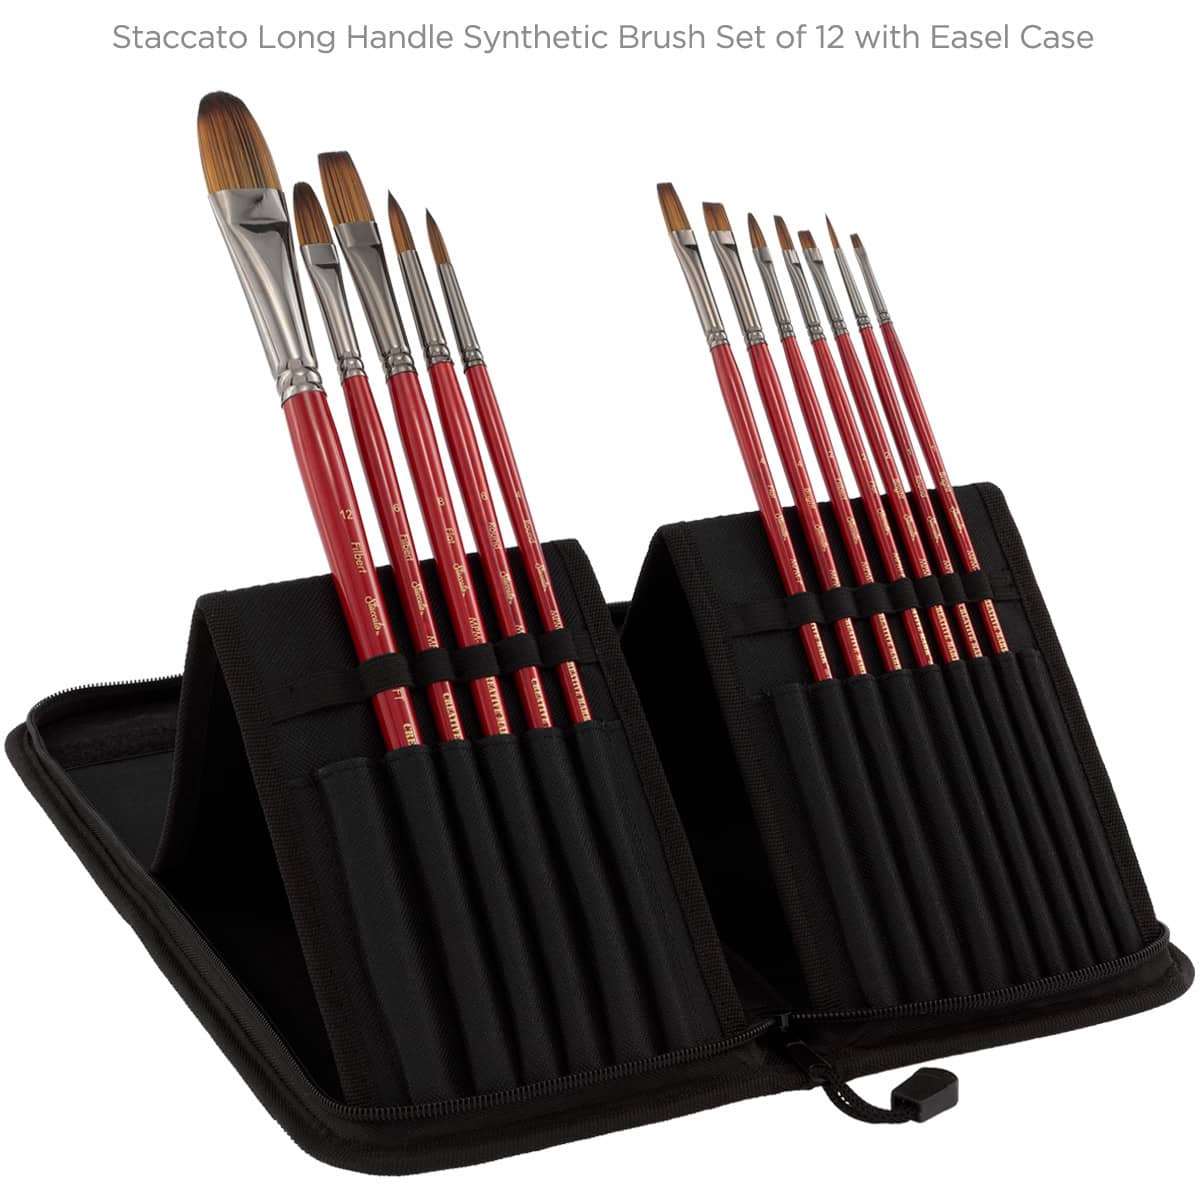 Staccato Long Handle Synthetic Brush Set